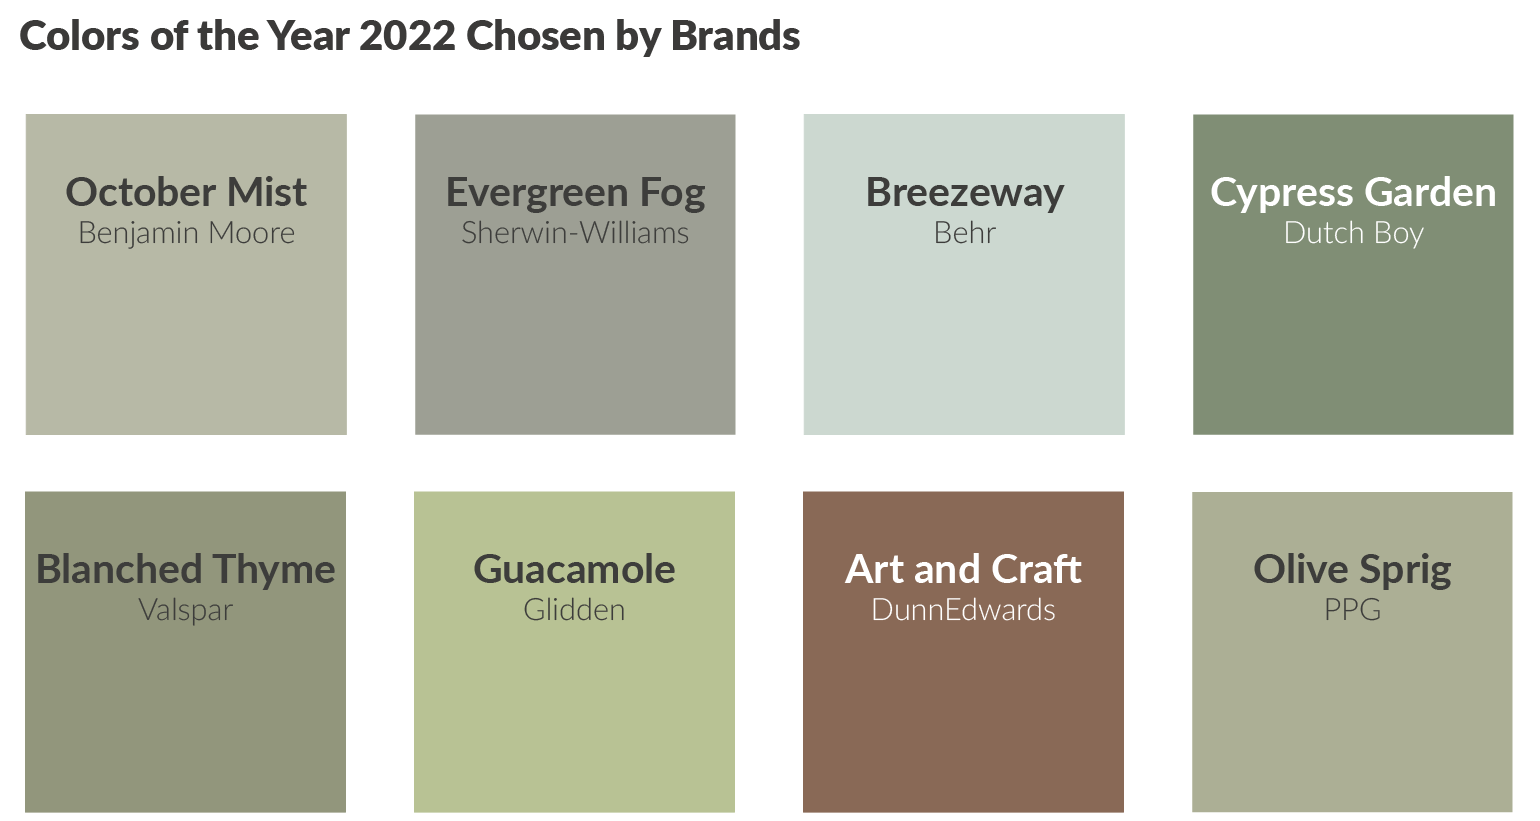 Paint Brands' Color of the Year 2022 Choices